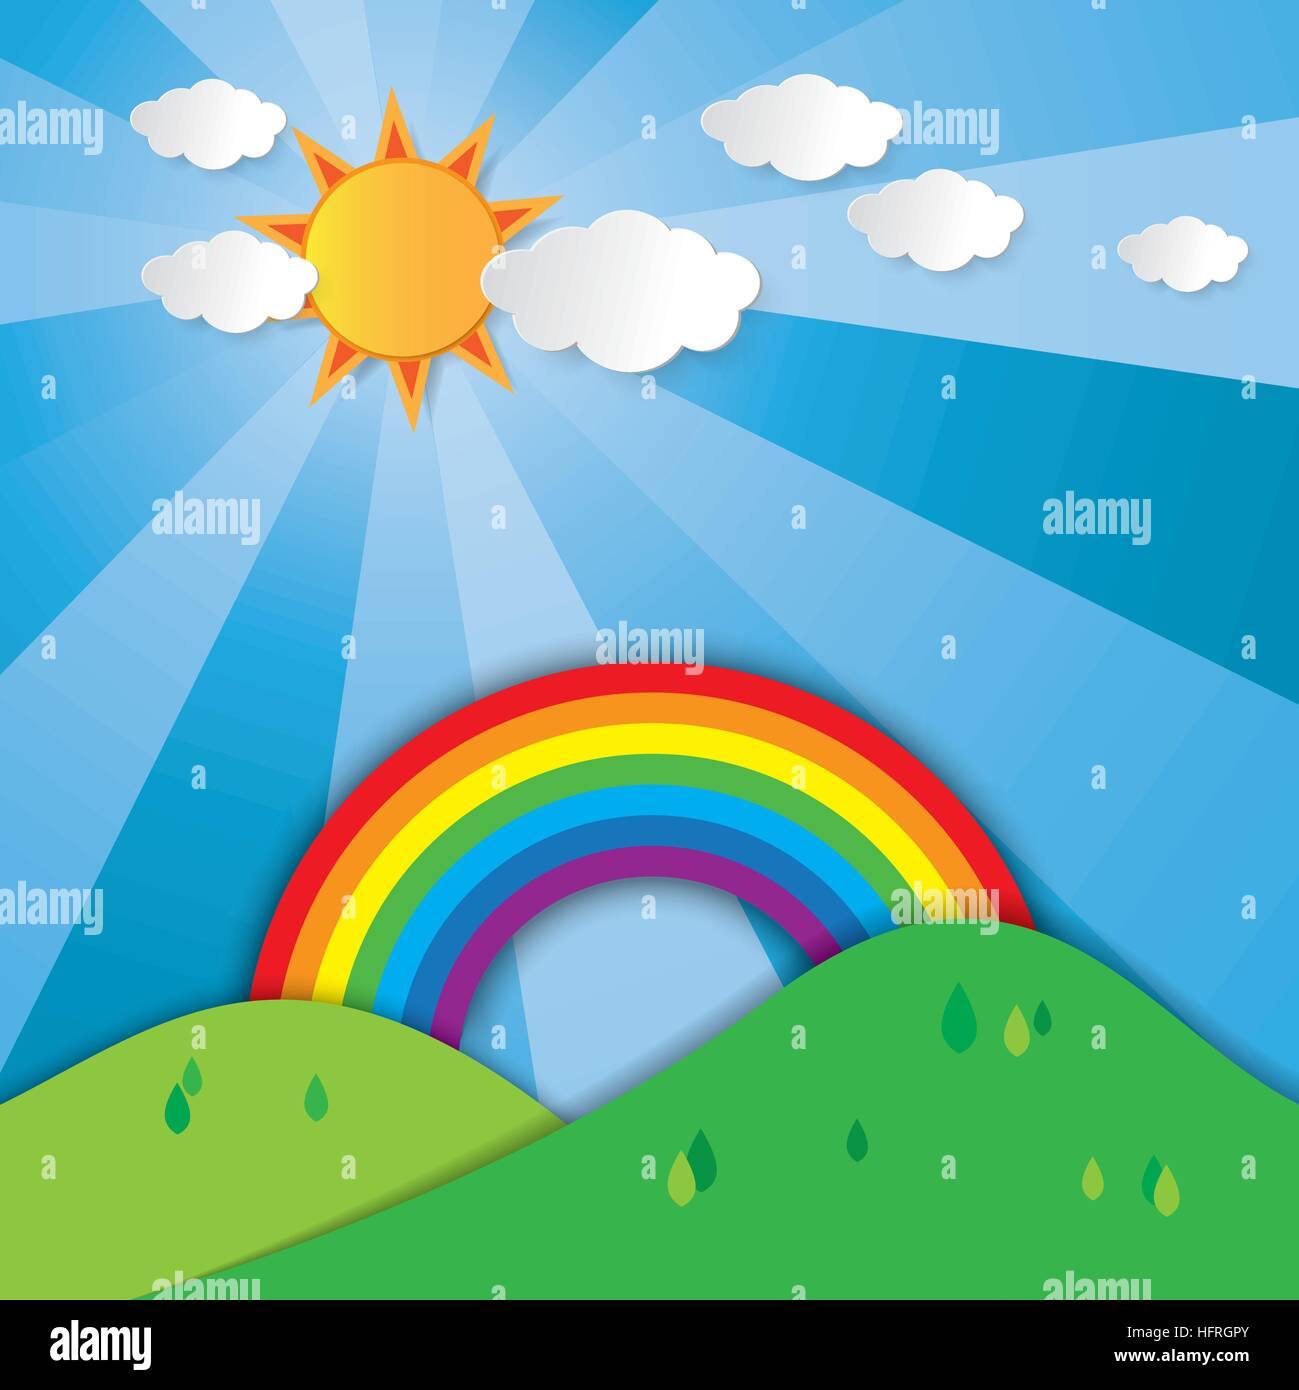 Landscape paper art style vector background showing mountain, tree, rainbow, sun, sky, cloud and sunlight. Stock Vector